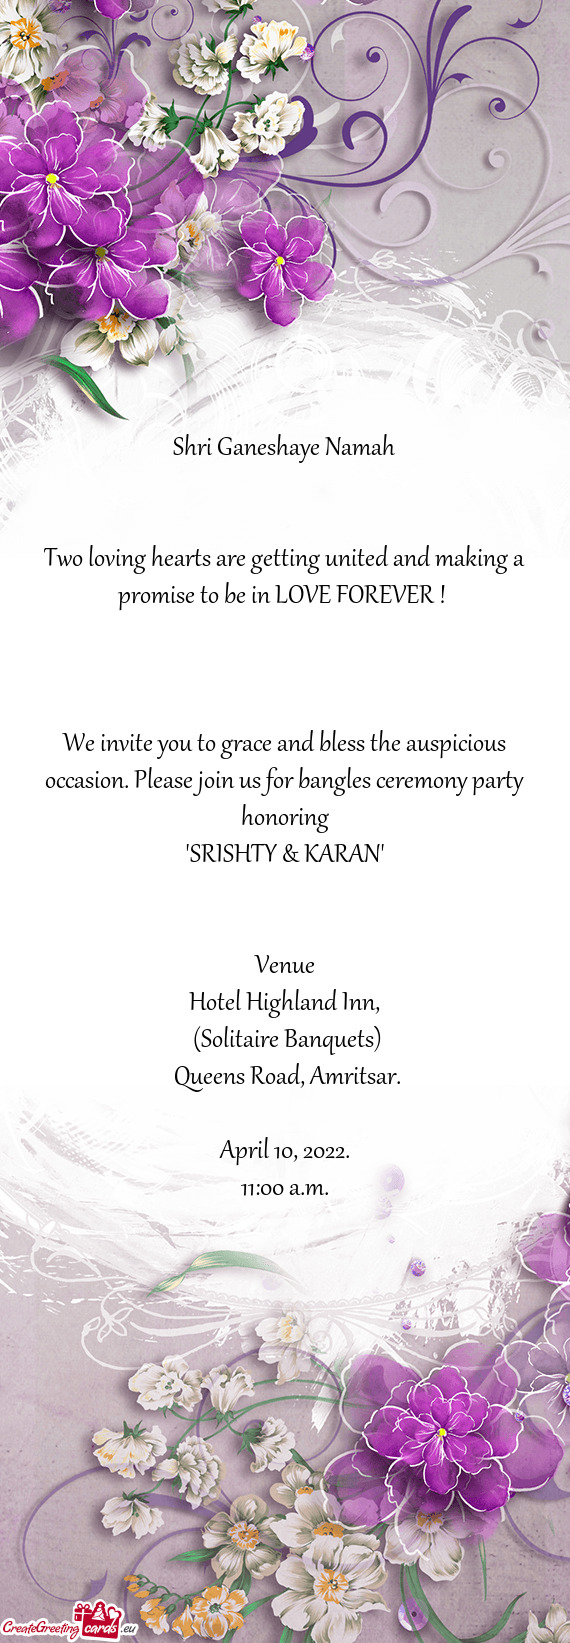 We invite you to grace and bless the auspicious occasion. Please join us for bangles ceremony party